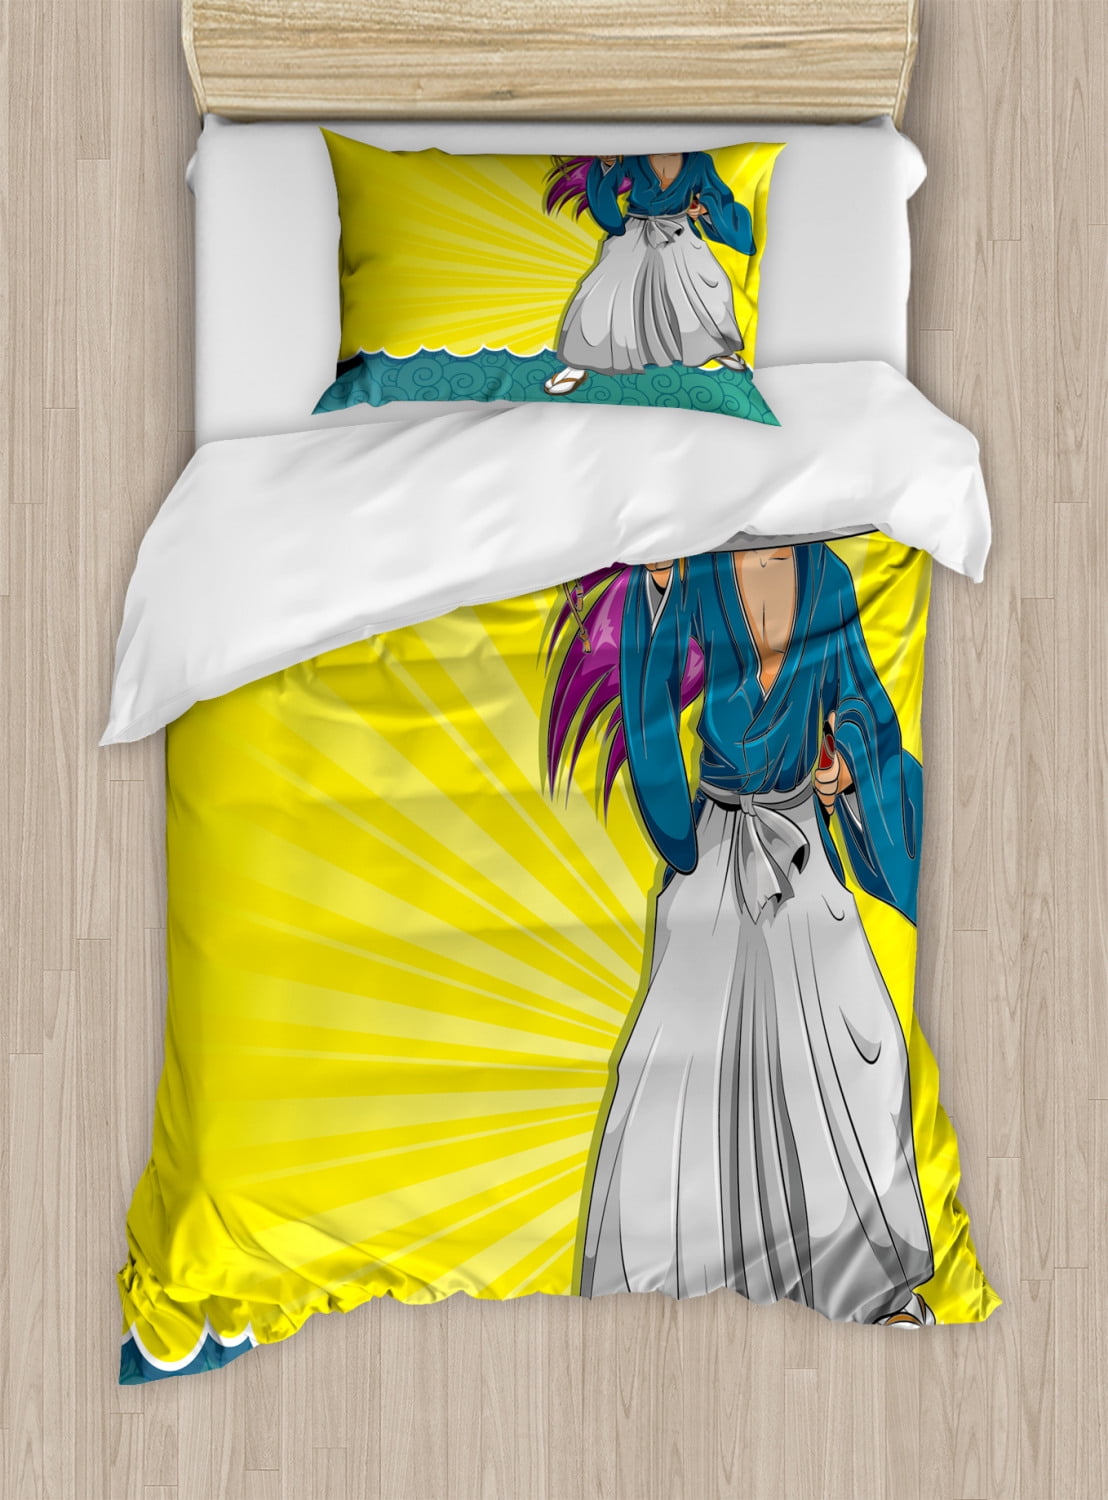 Anime Twin Size Duvet Cover Set Manga, Character Twin Bed